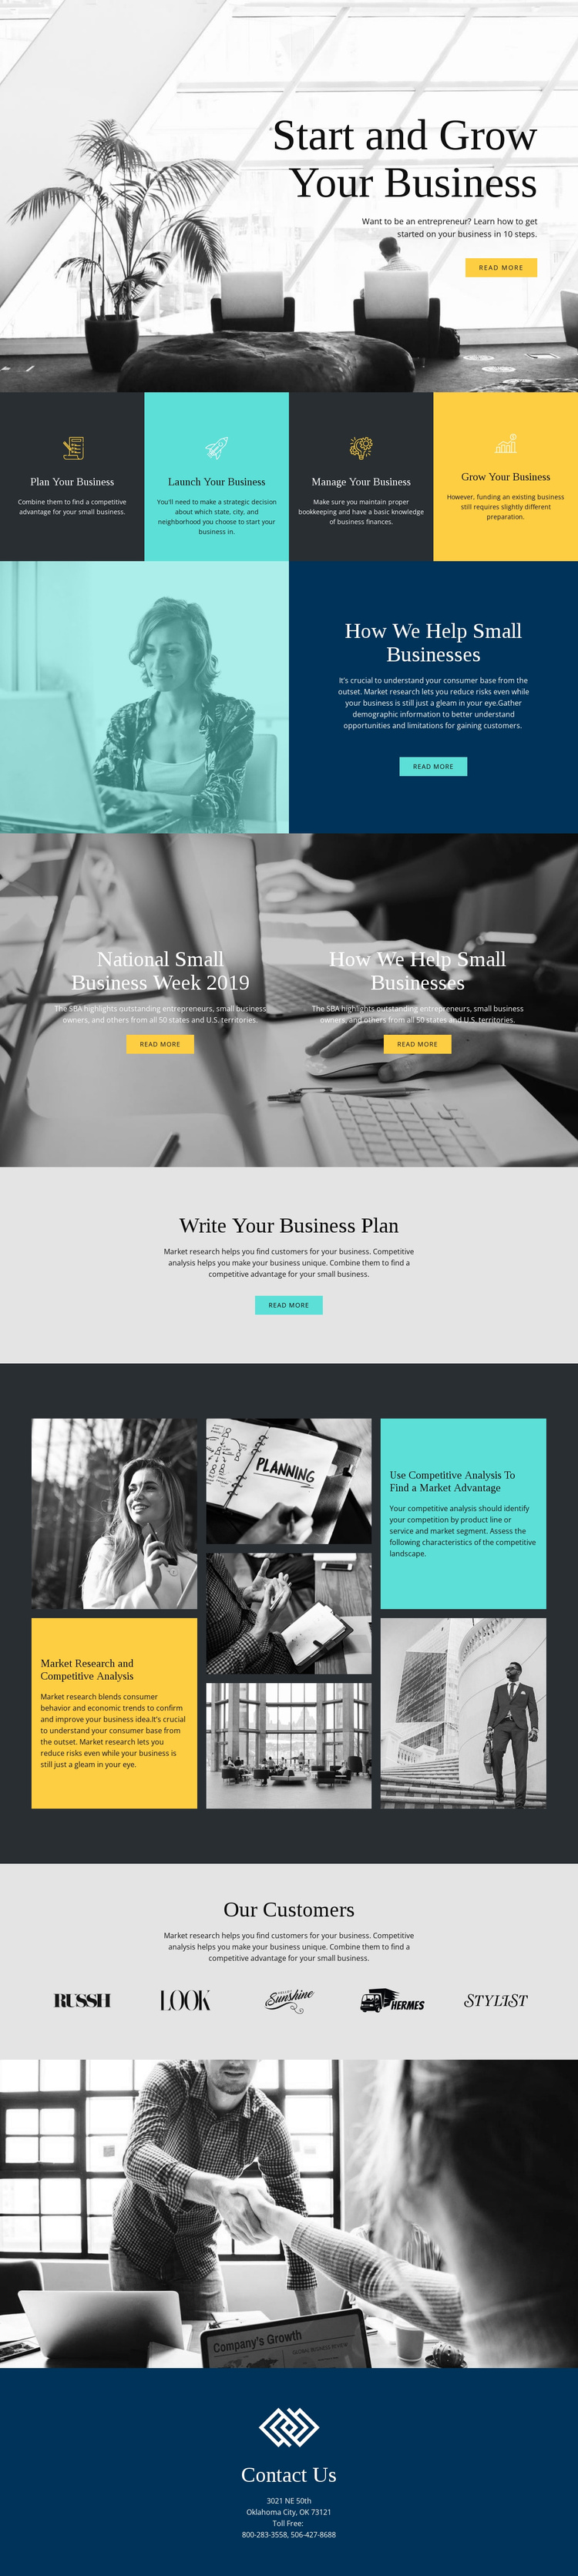 Start and grow your business Joomla Template